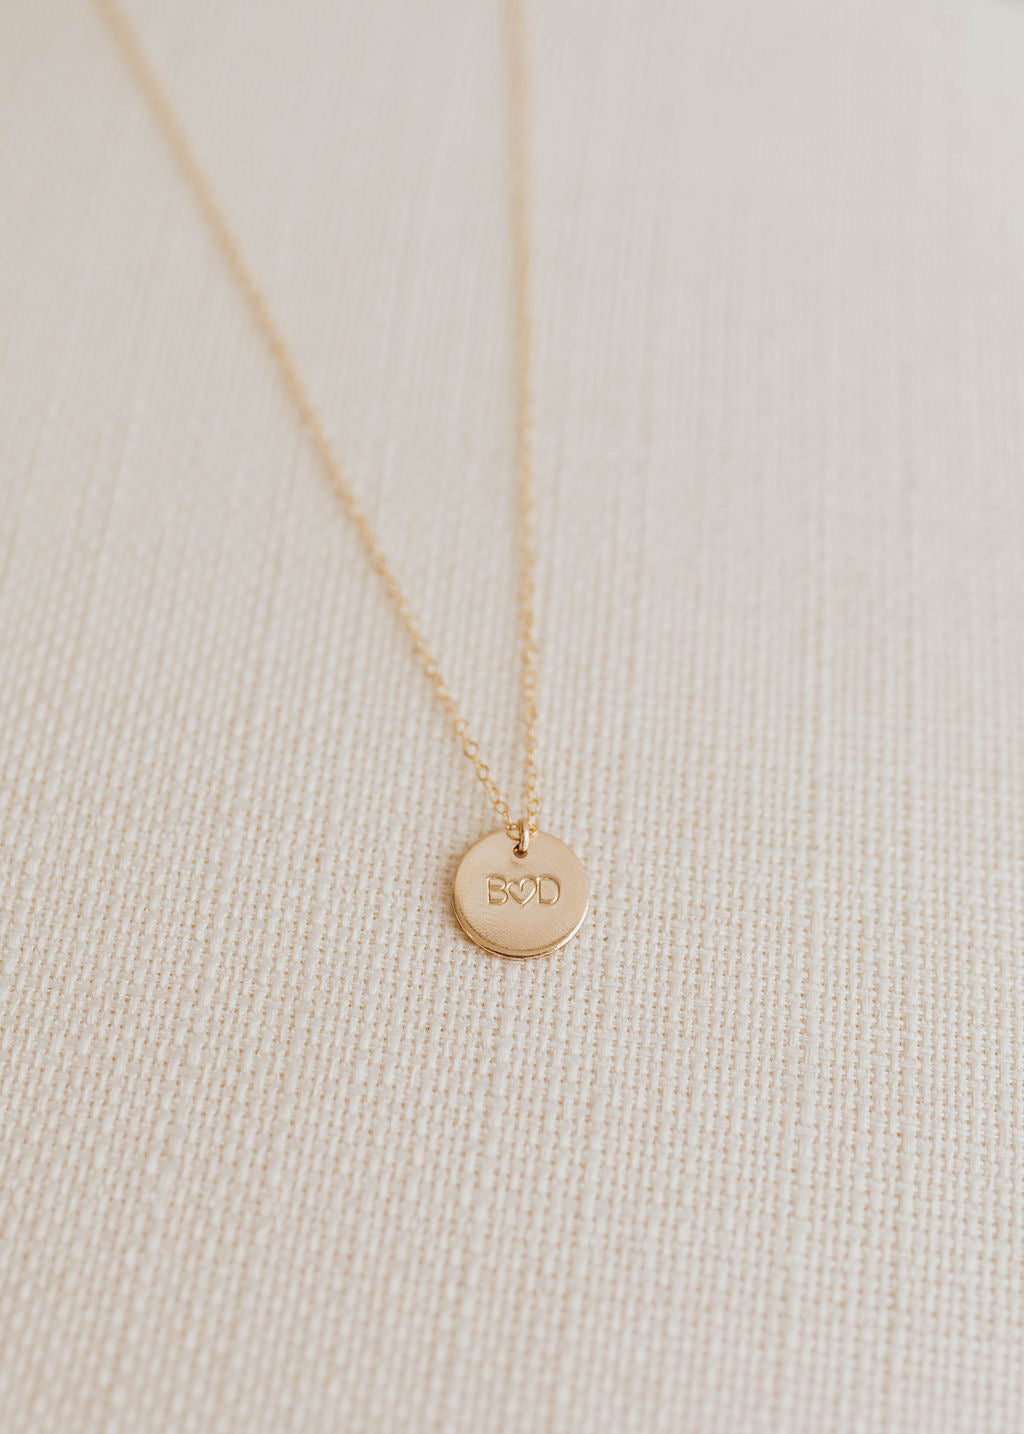 Amore Disc Necklace - 1/2"